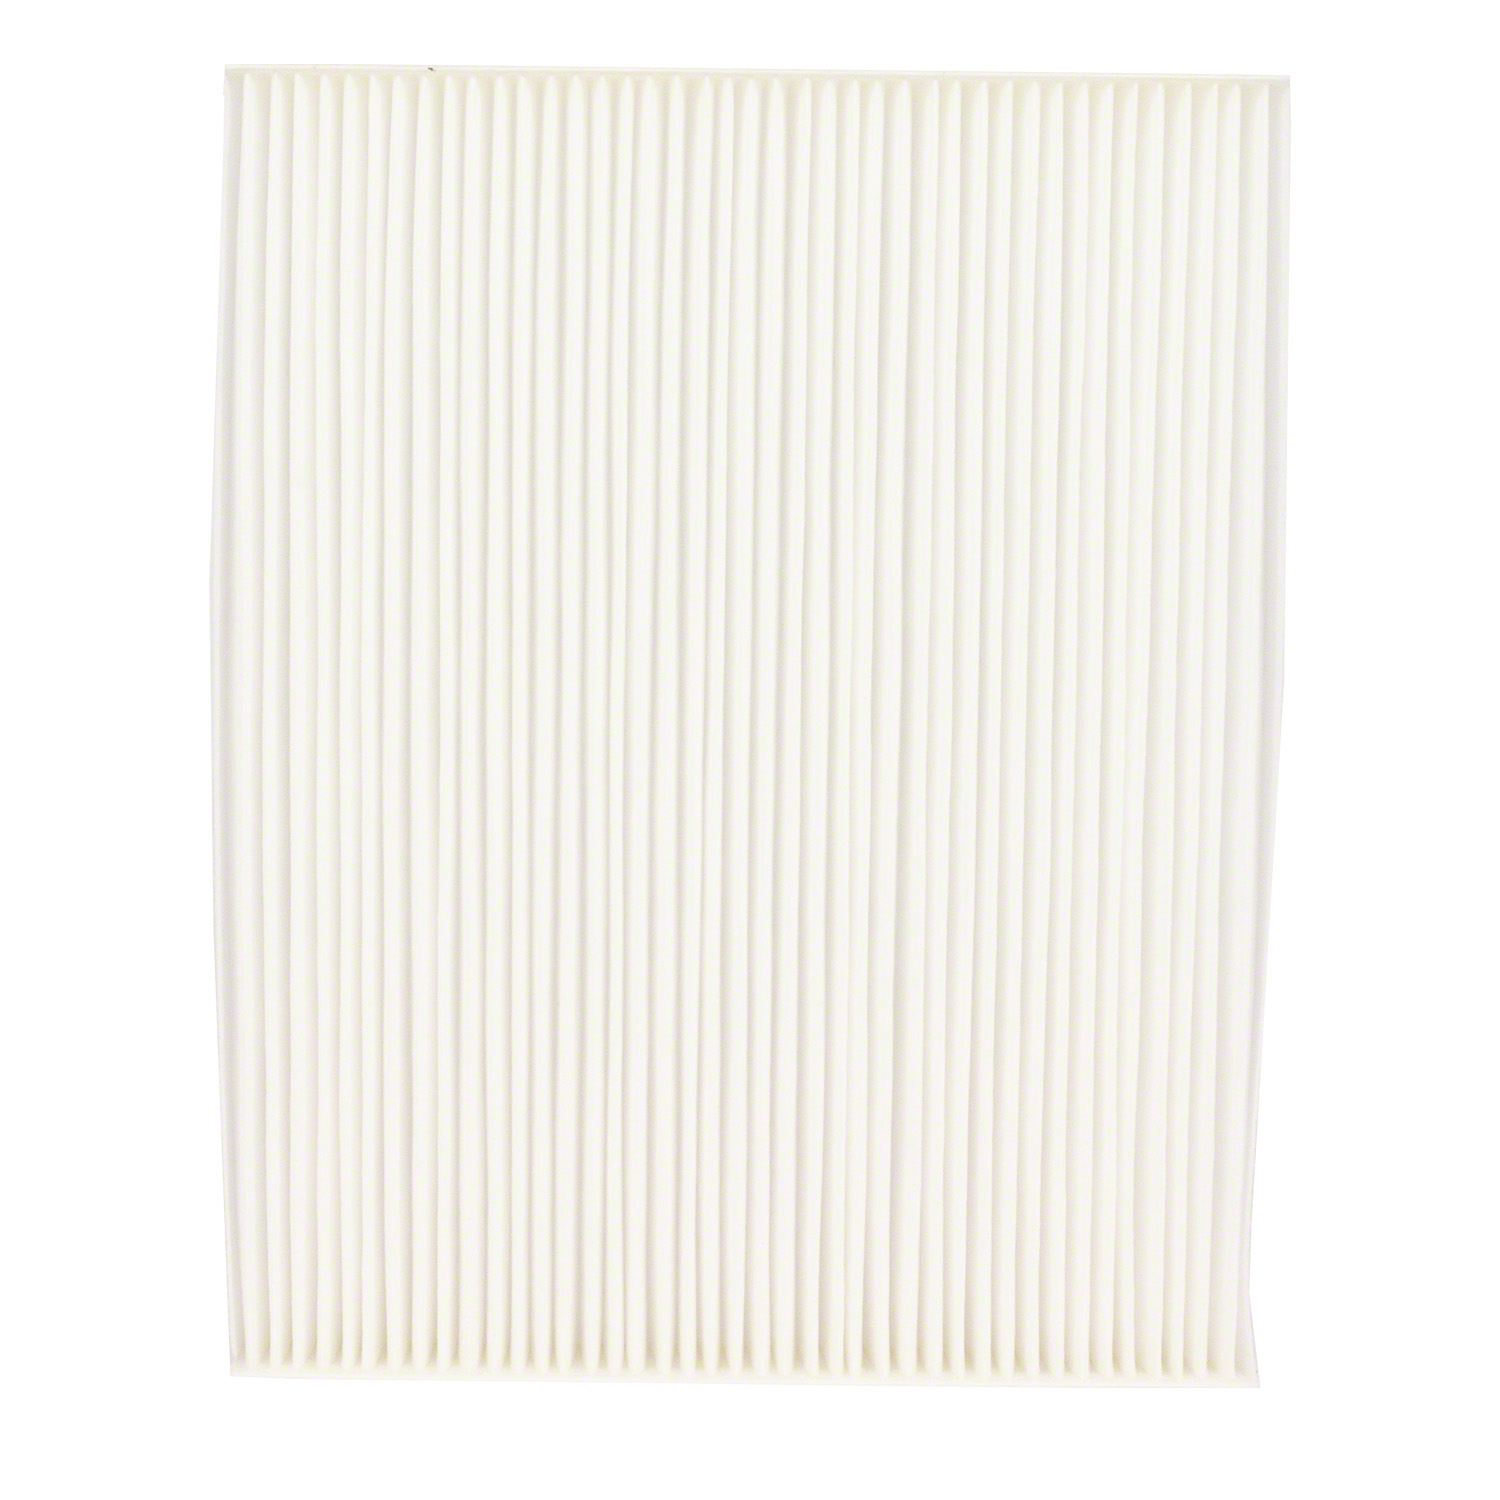 Cabin Air Filter. Filter ODOUR and P. OEM Parts FP67